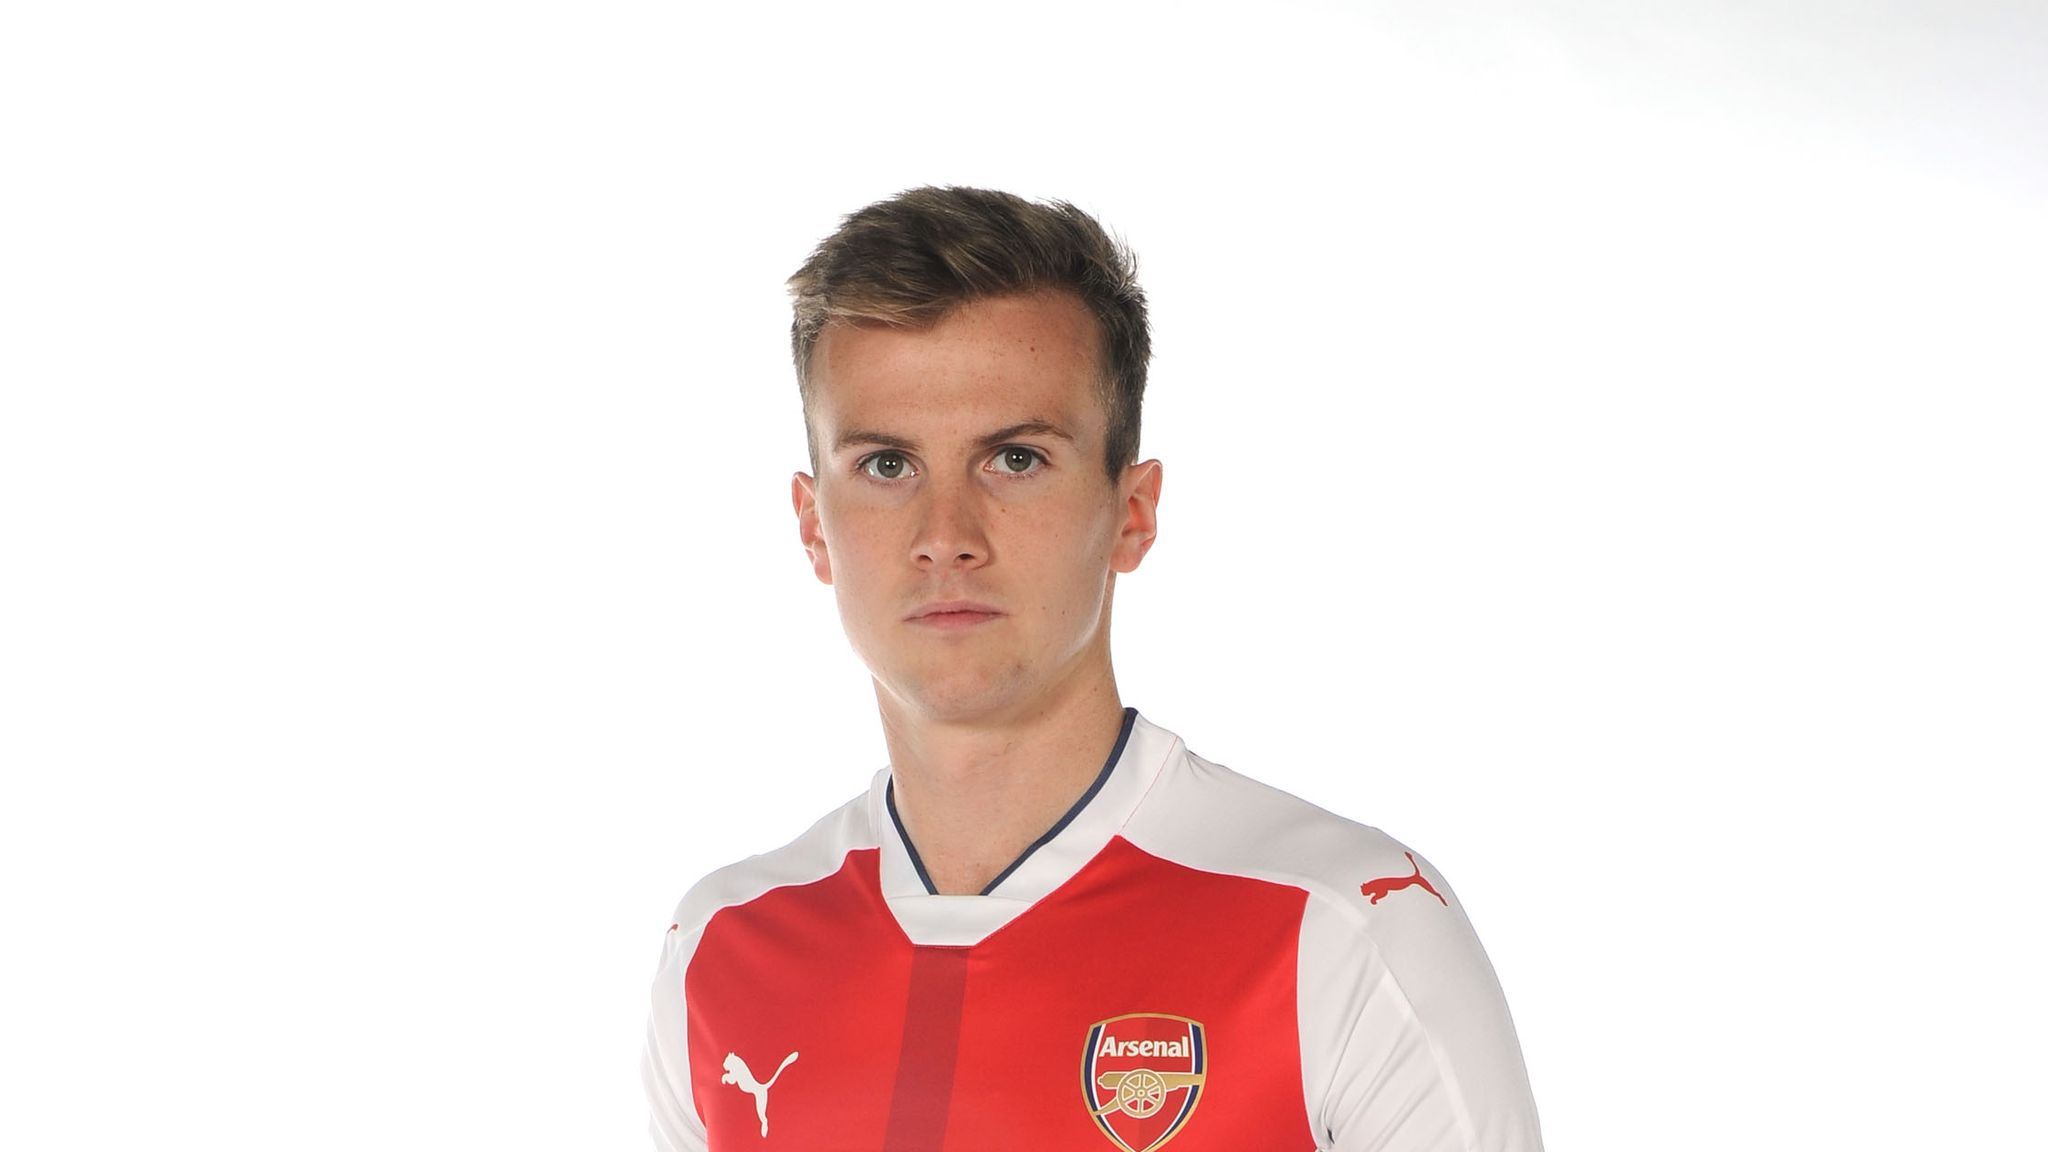 Rob Holding Wallpapers